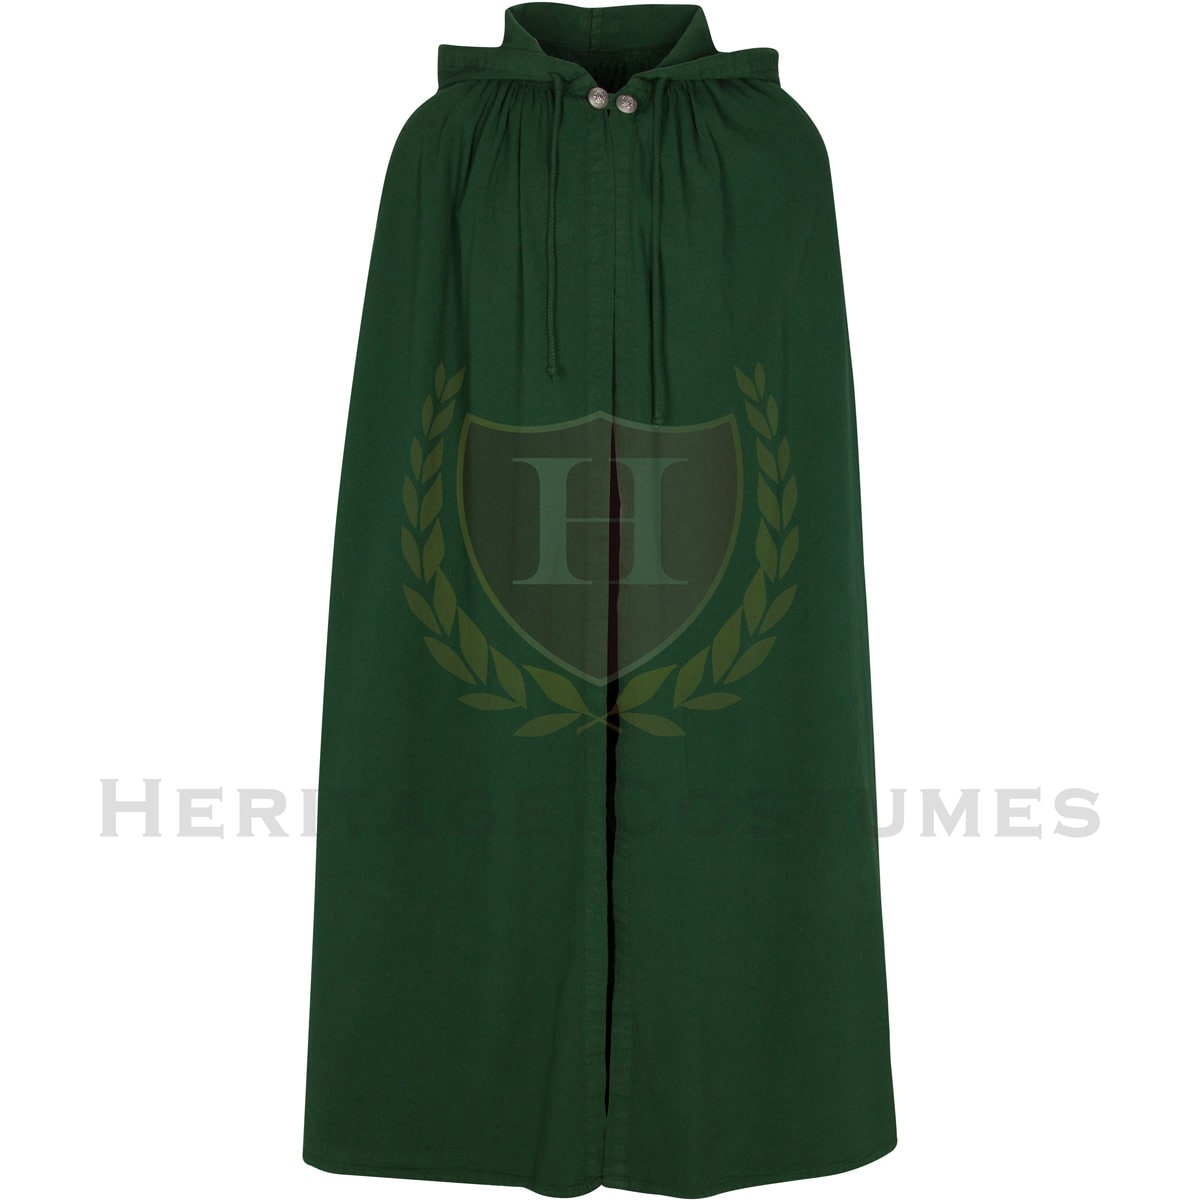 Renaissance Hooded Cloak with Clasp